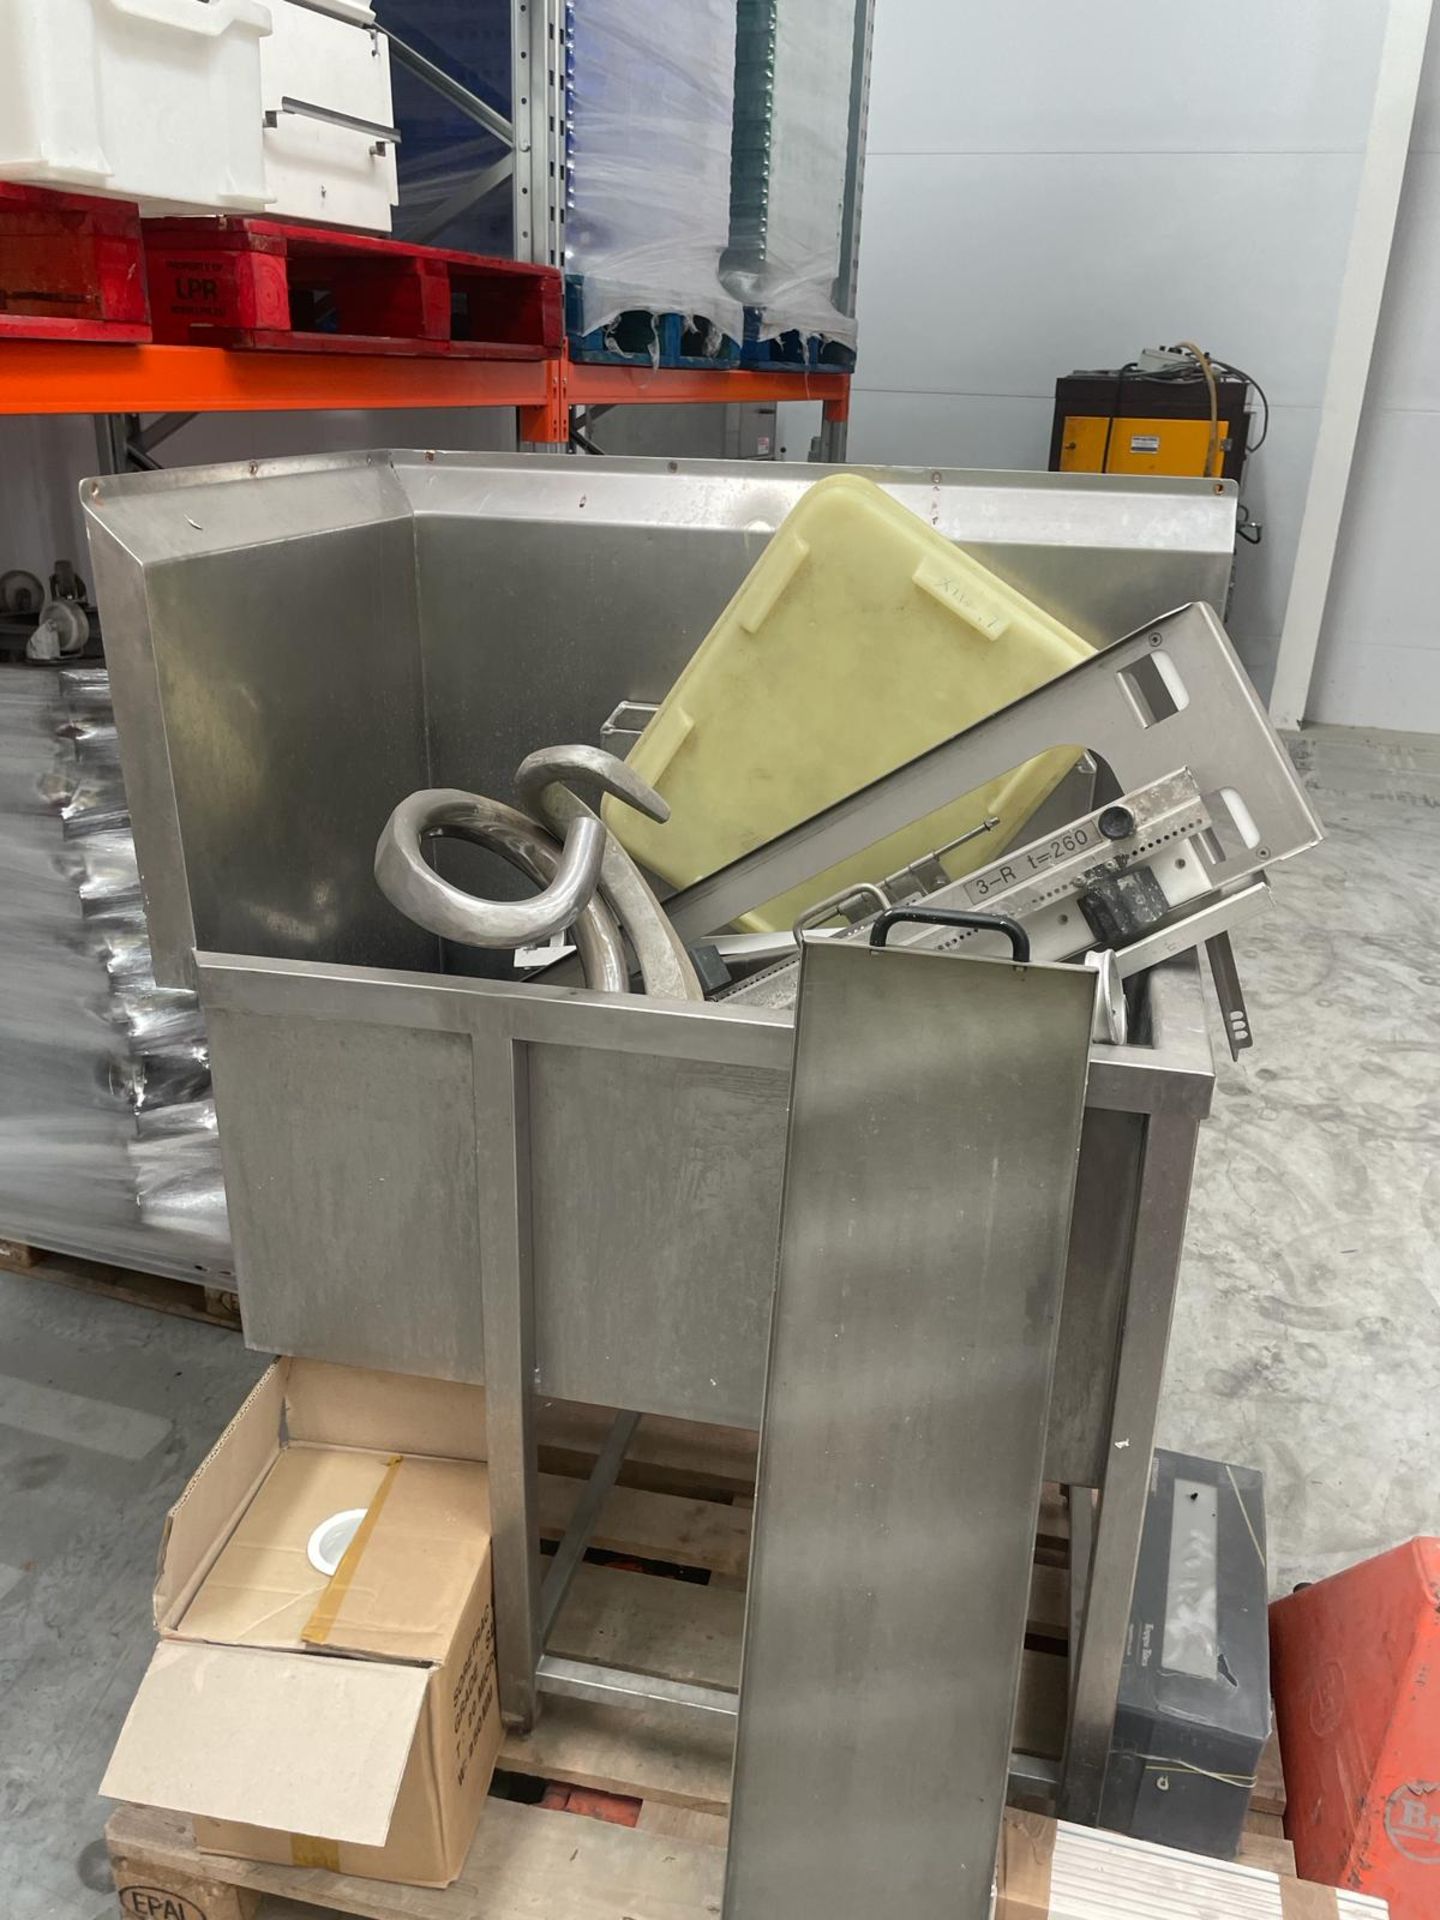 Stainless Steel Sink. Corner unit. Approx. 900 x 600 x 1300 mm. Please note this lot is located at - Bild 7 aus 8